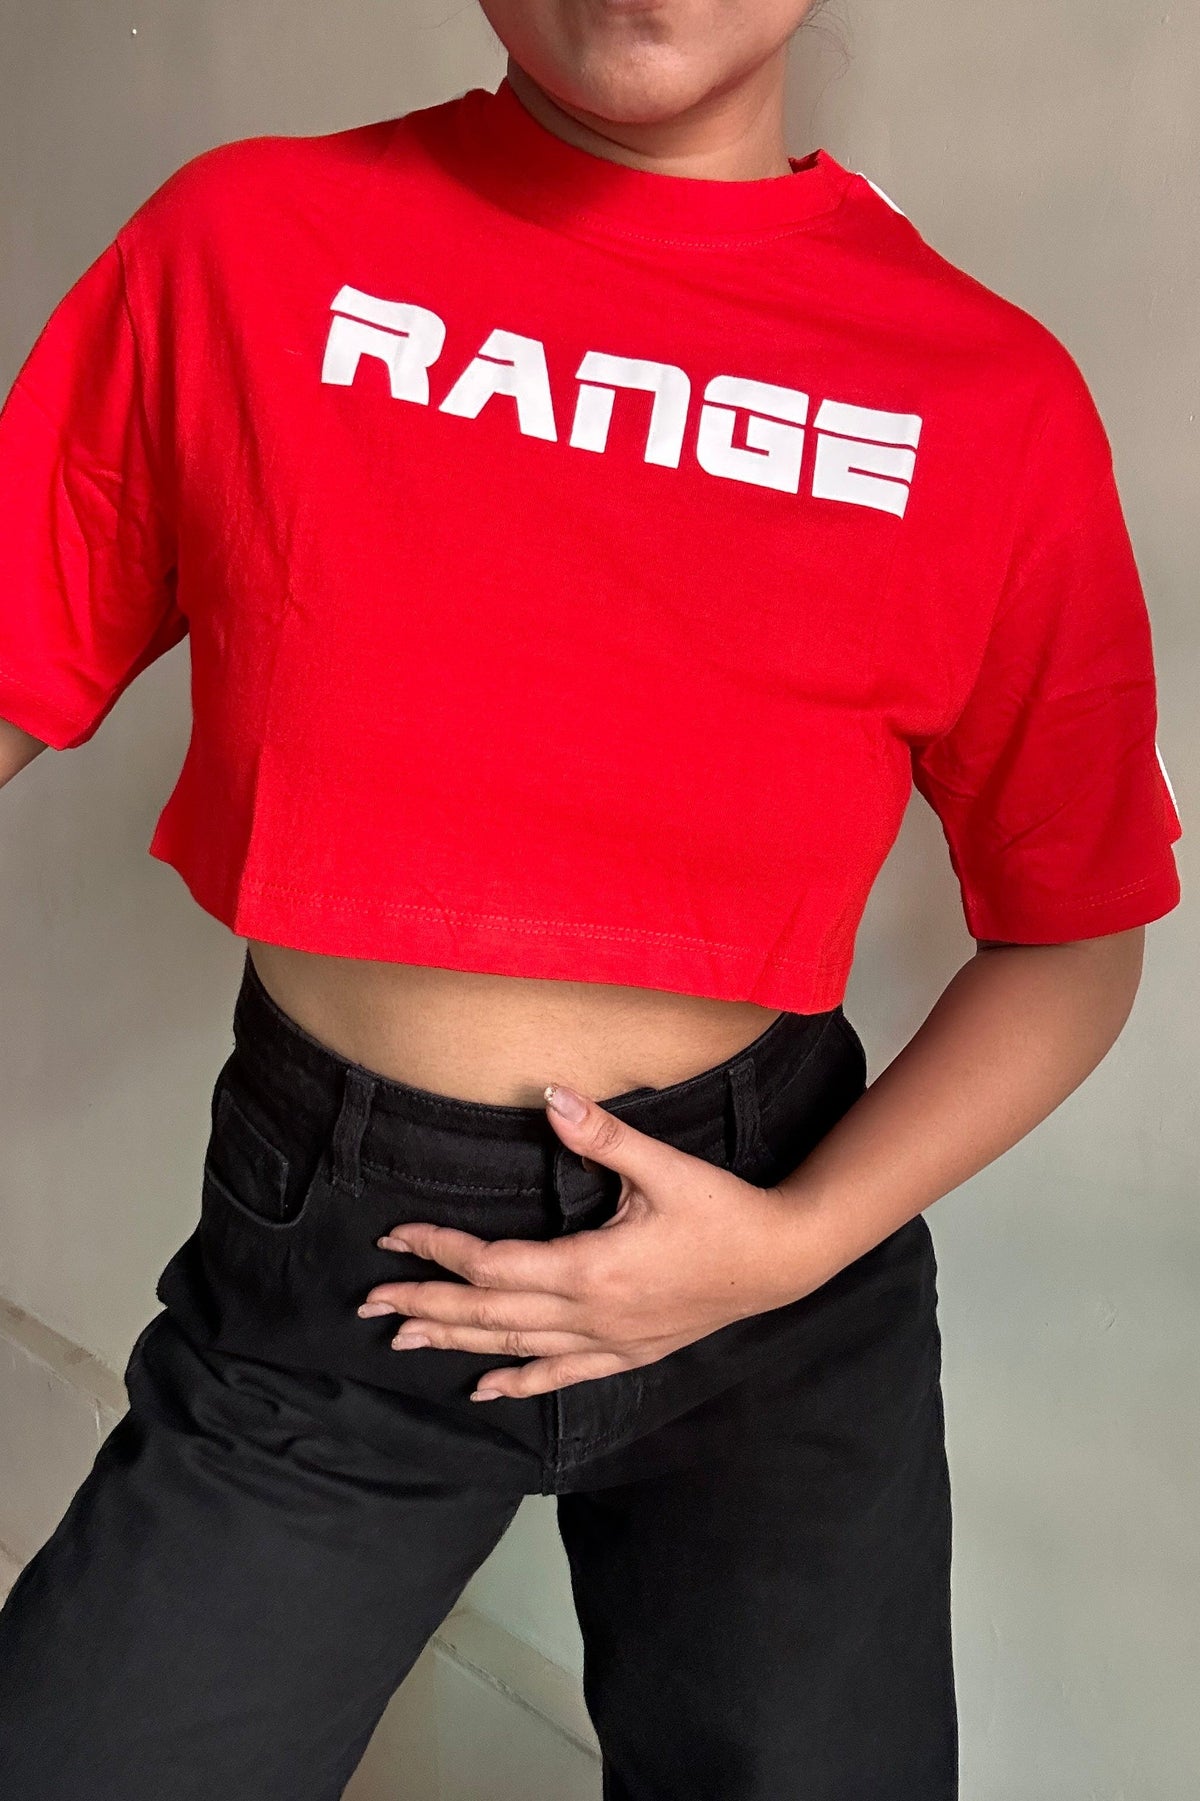 Out of your Range top